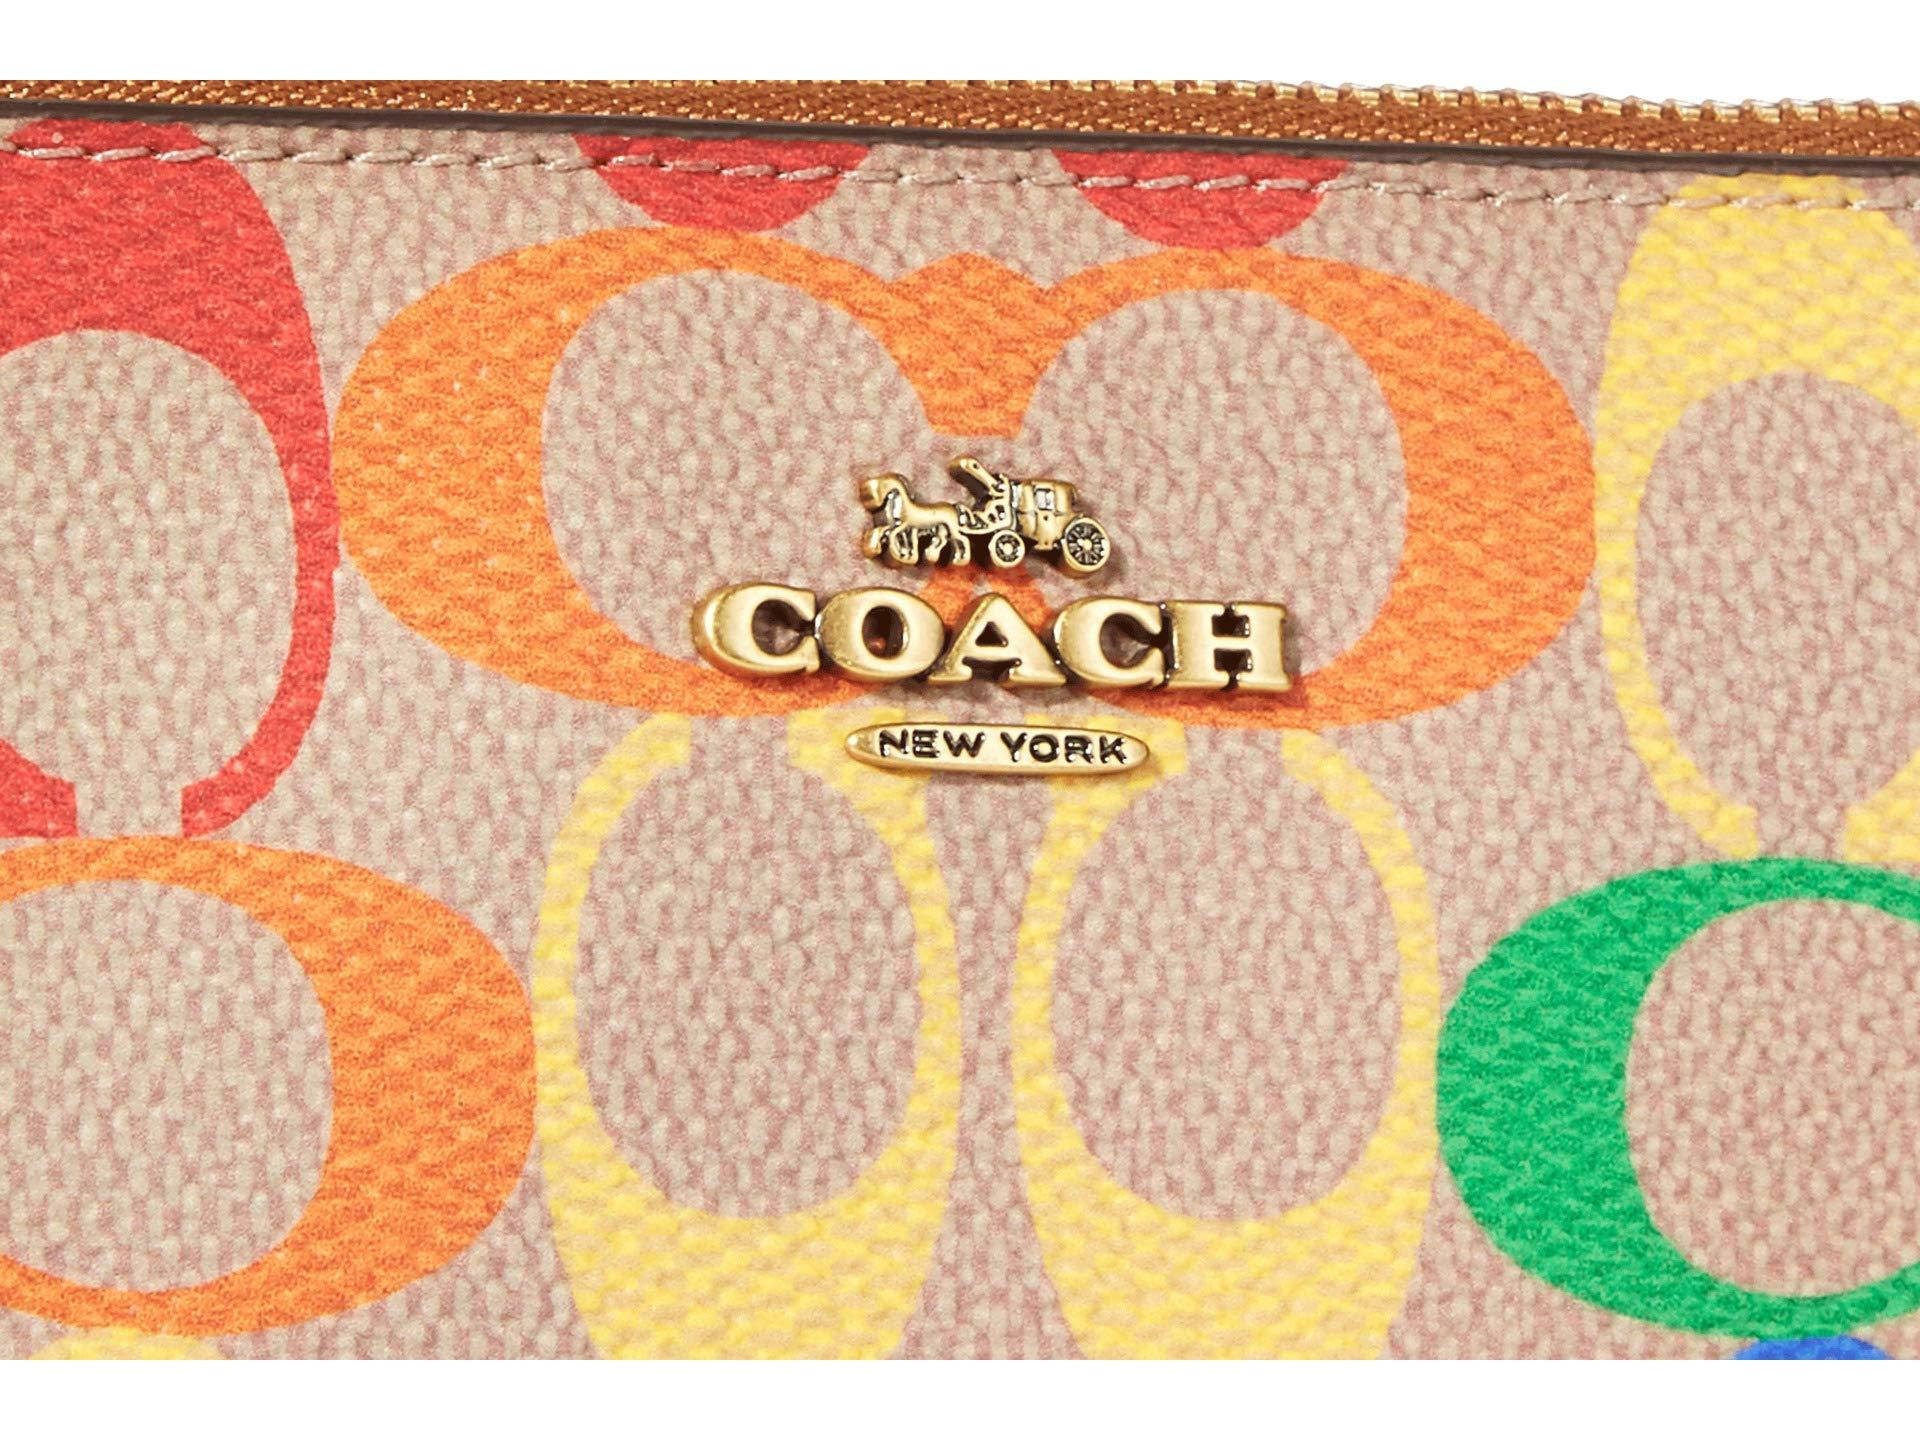 Coach 1920X1440 Wallpaper and Background Image